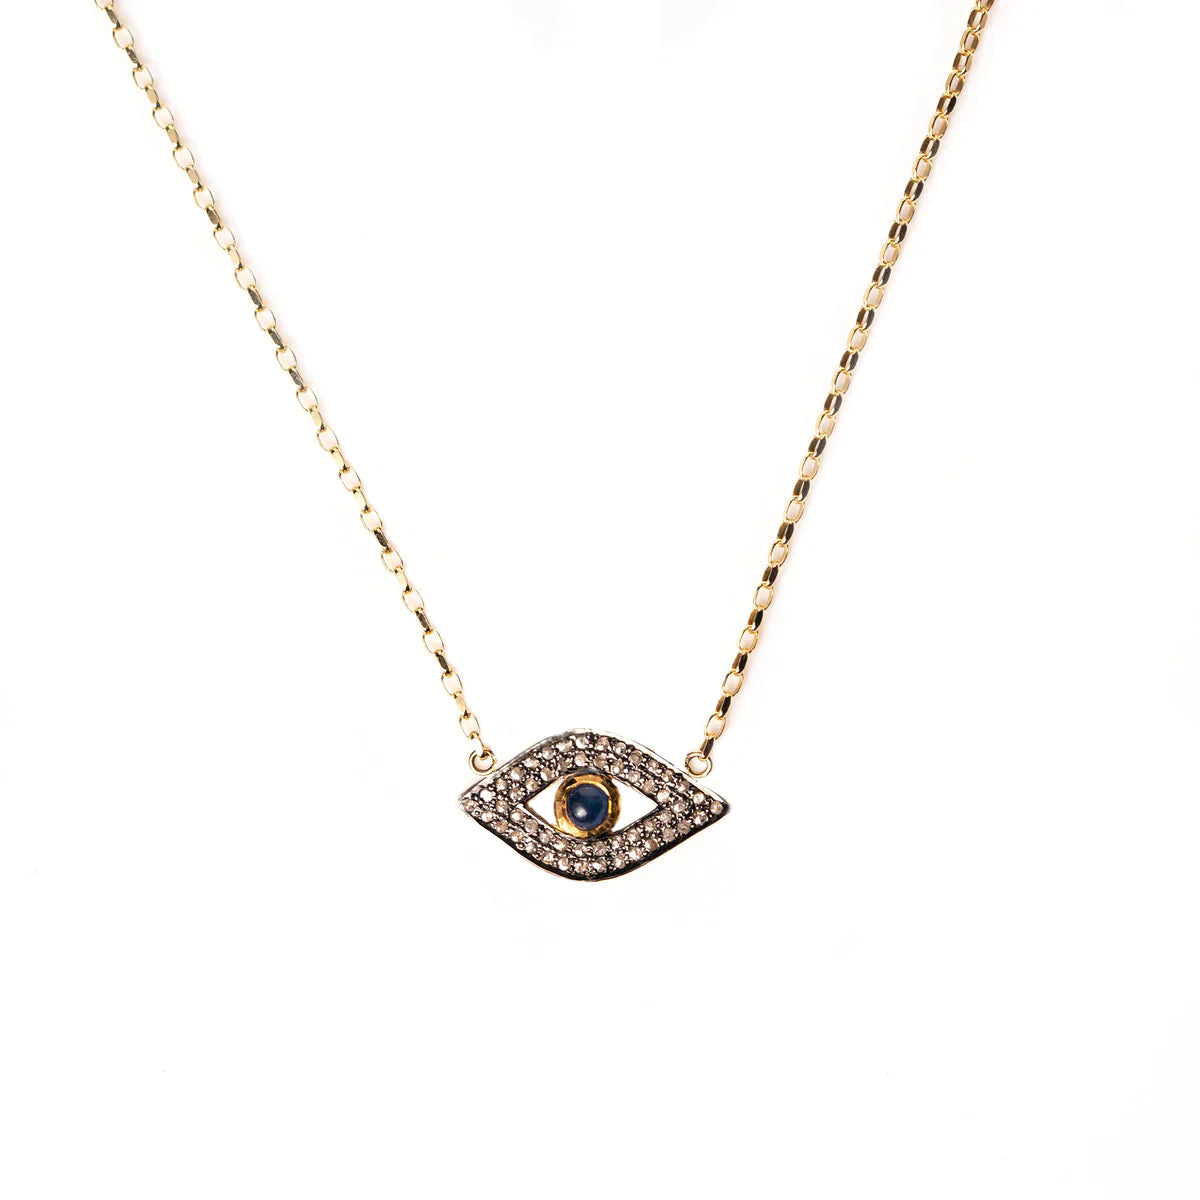 Evil eye pendant necklace on gold plated chain with emerald centre stone